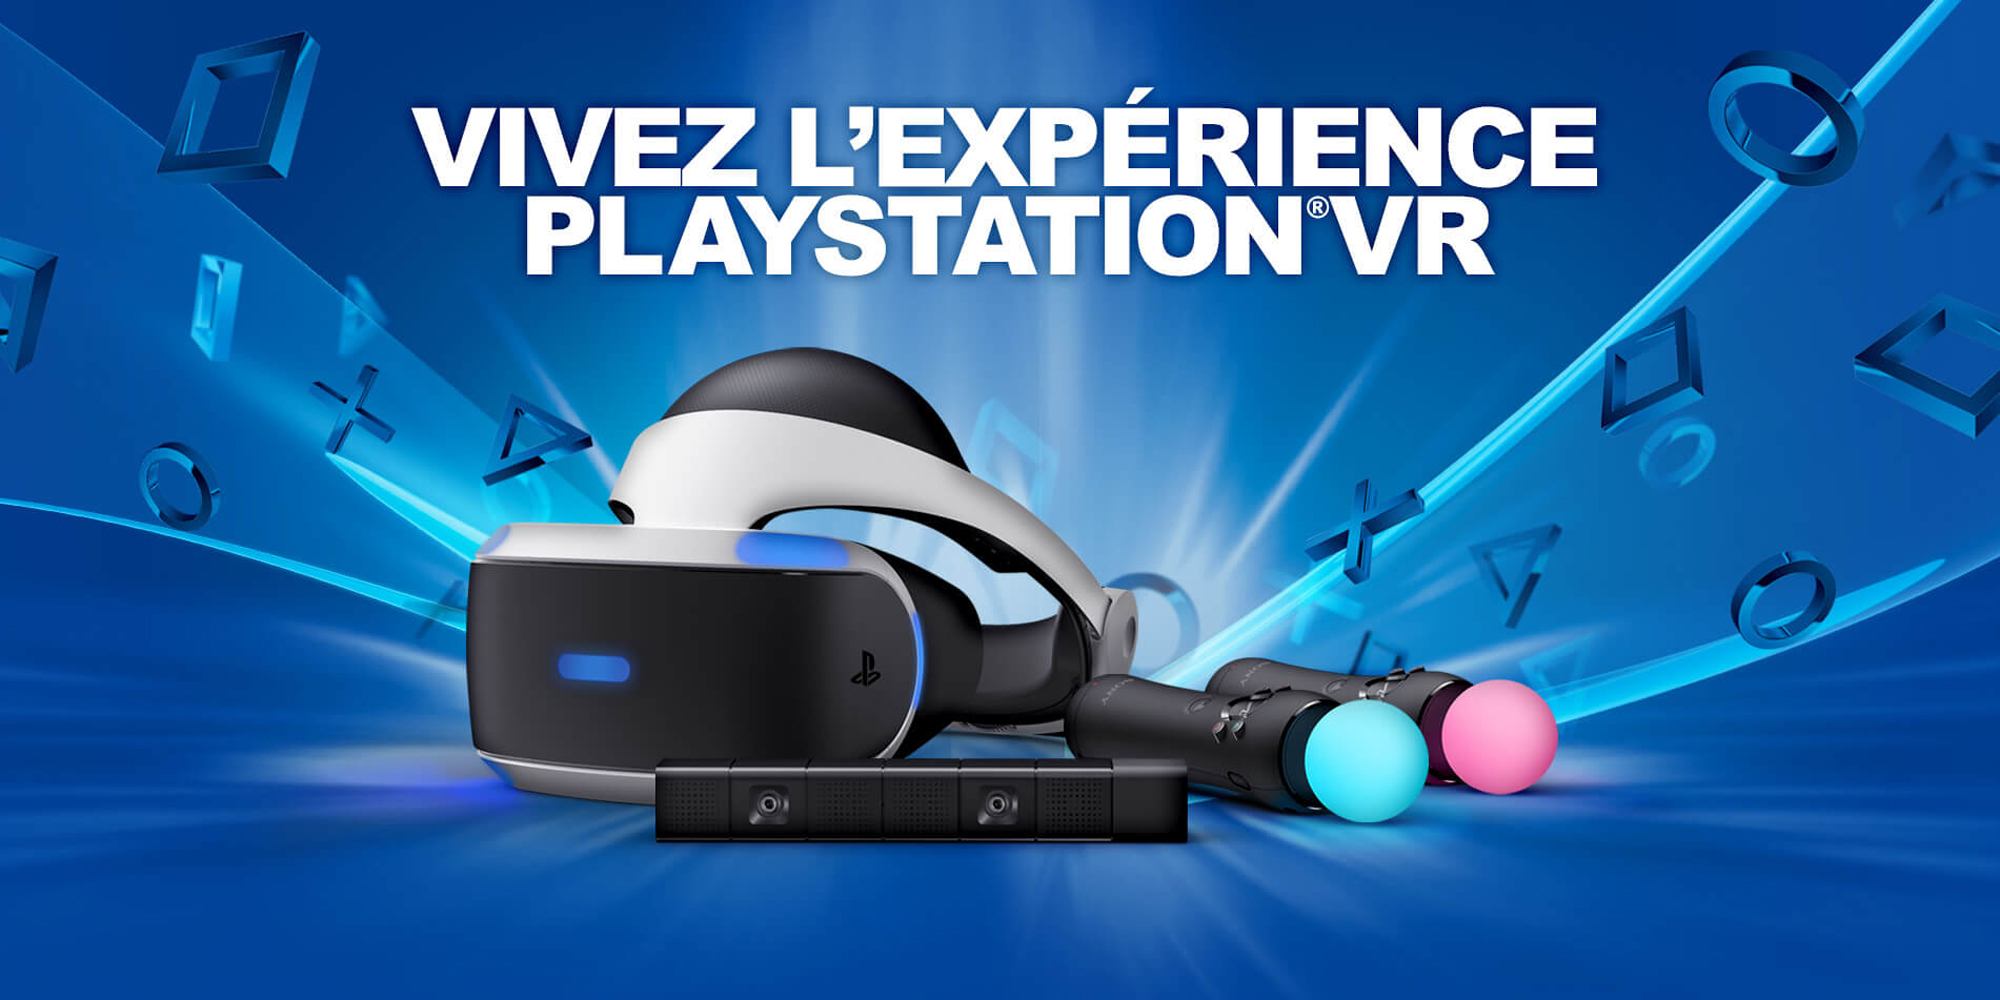  On a enfin reçu notre Playstation VR